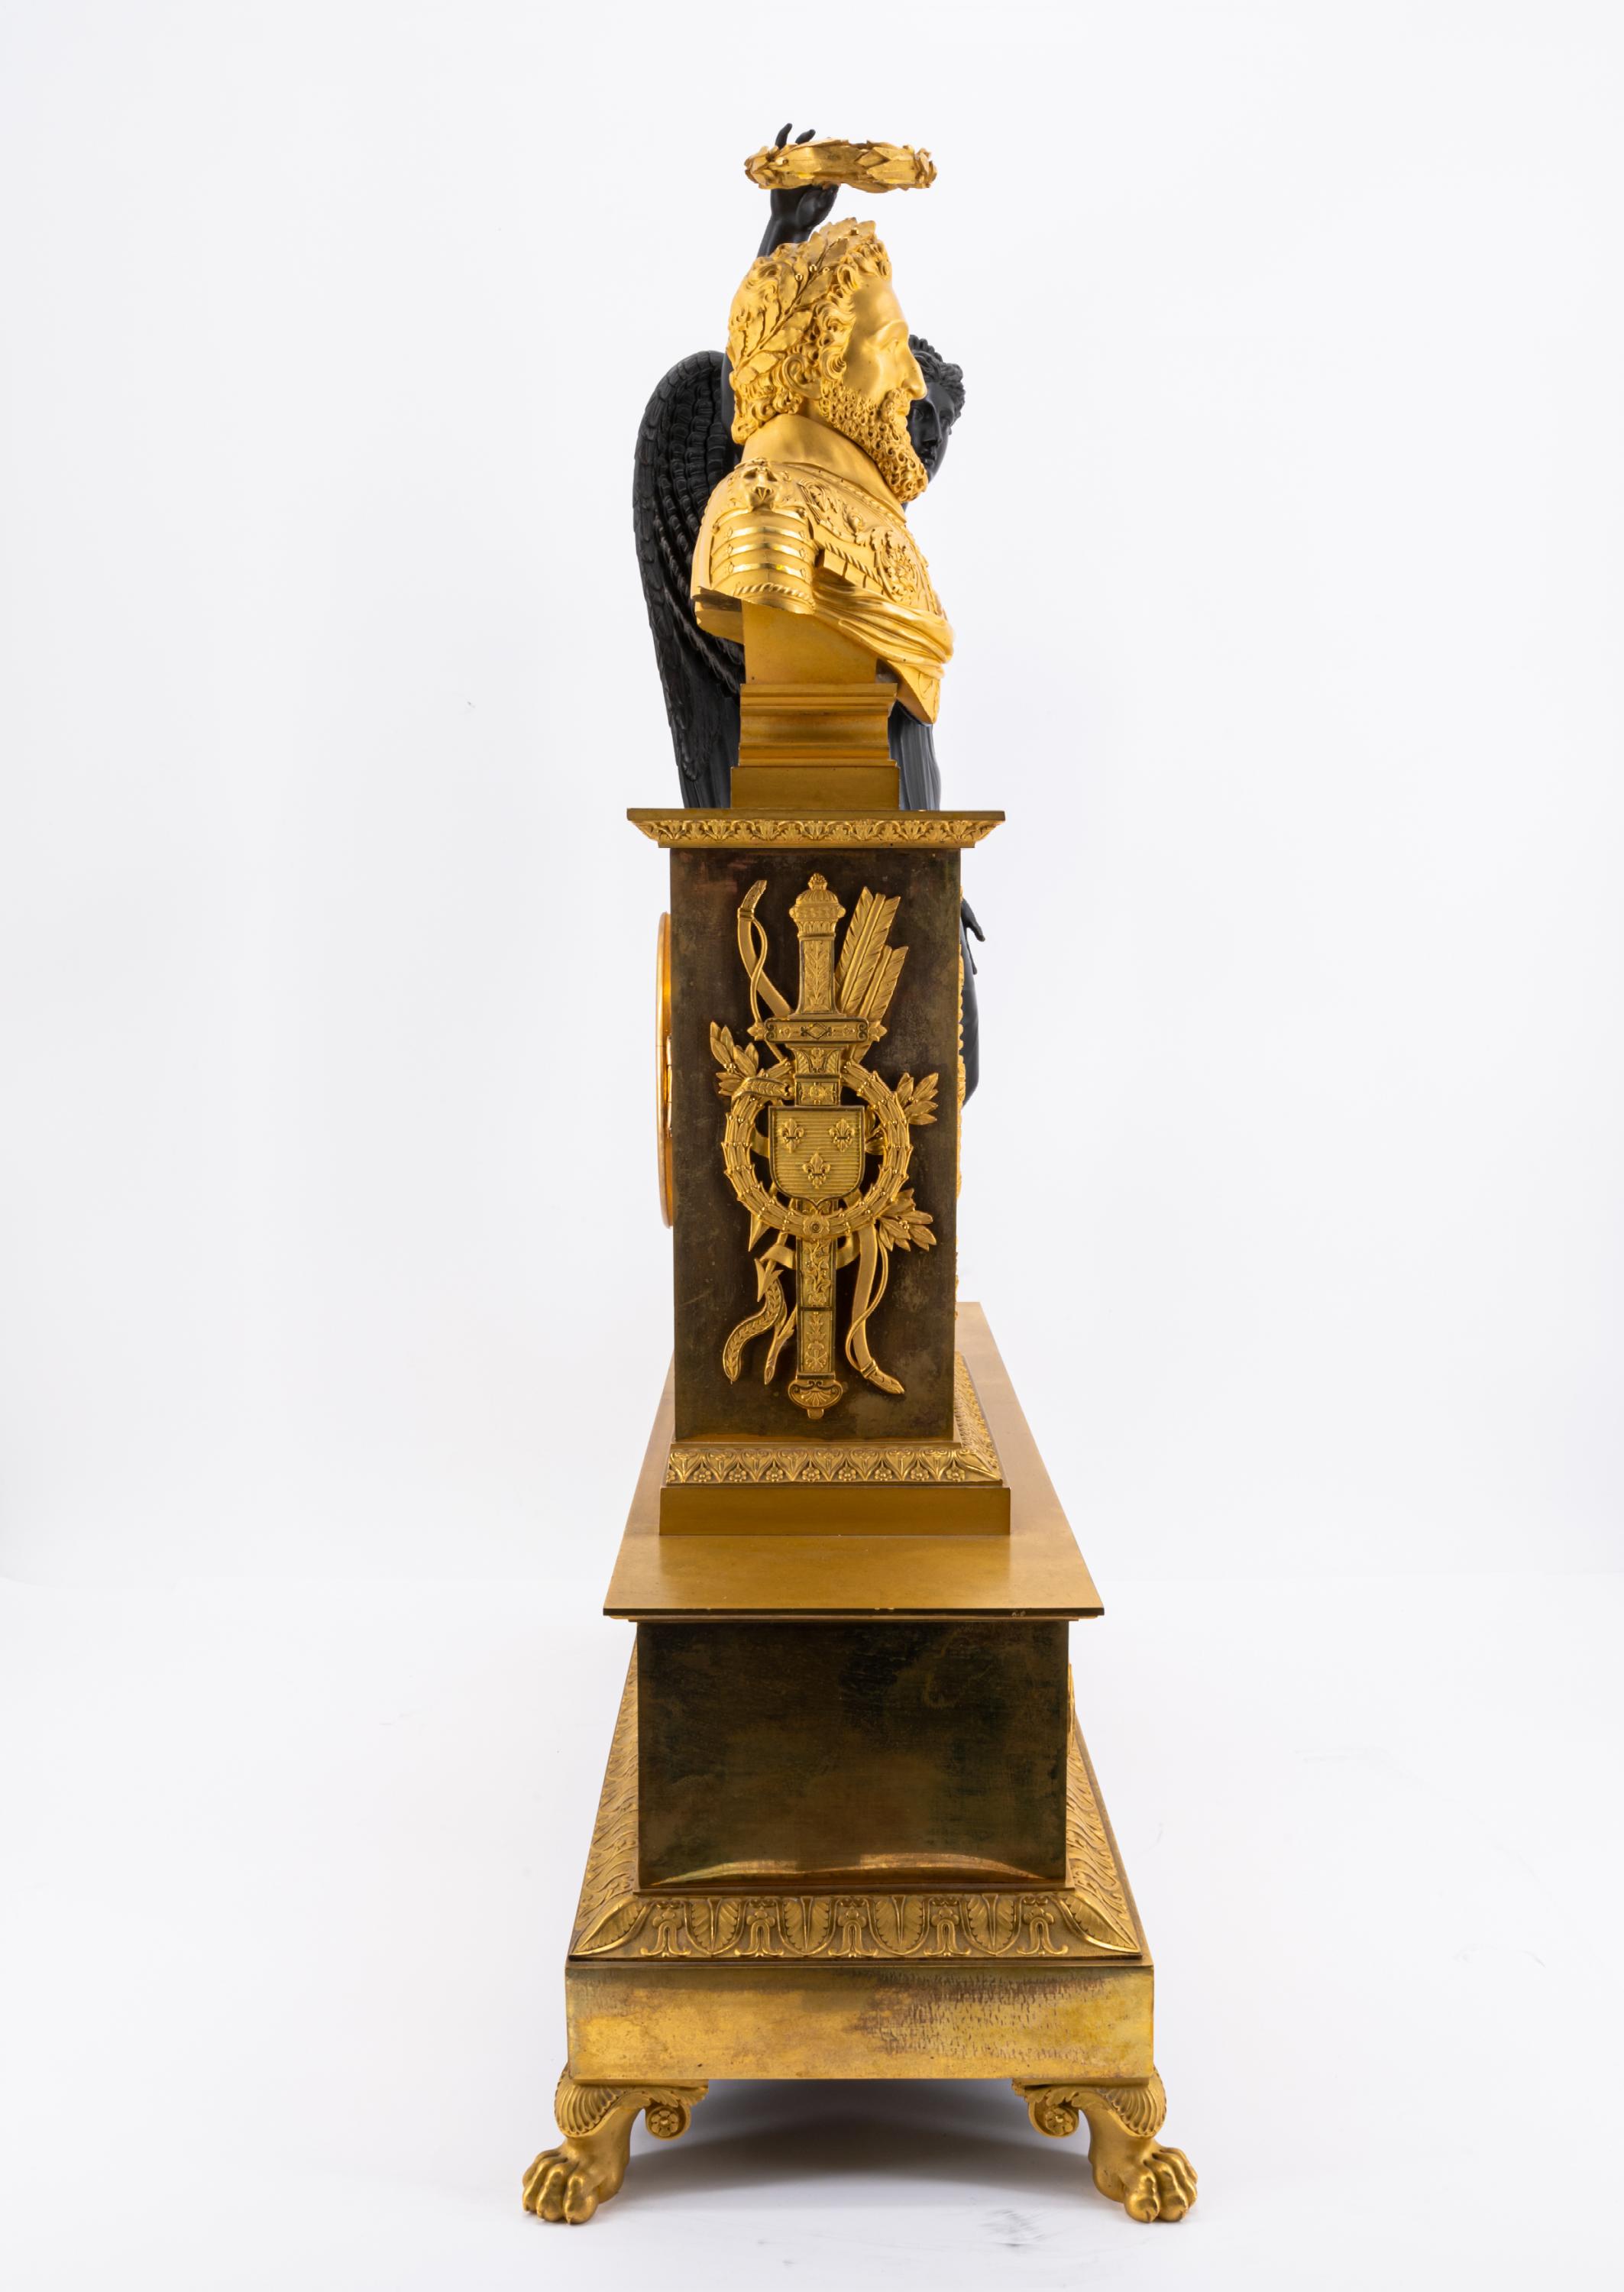 BRONZE MONUMENTAL PENDULUM CLOCK WITH BUST OF HENRY IV AND VICTORIA - Image 4 of 5